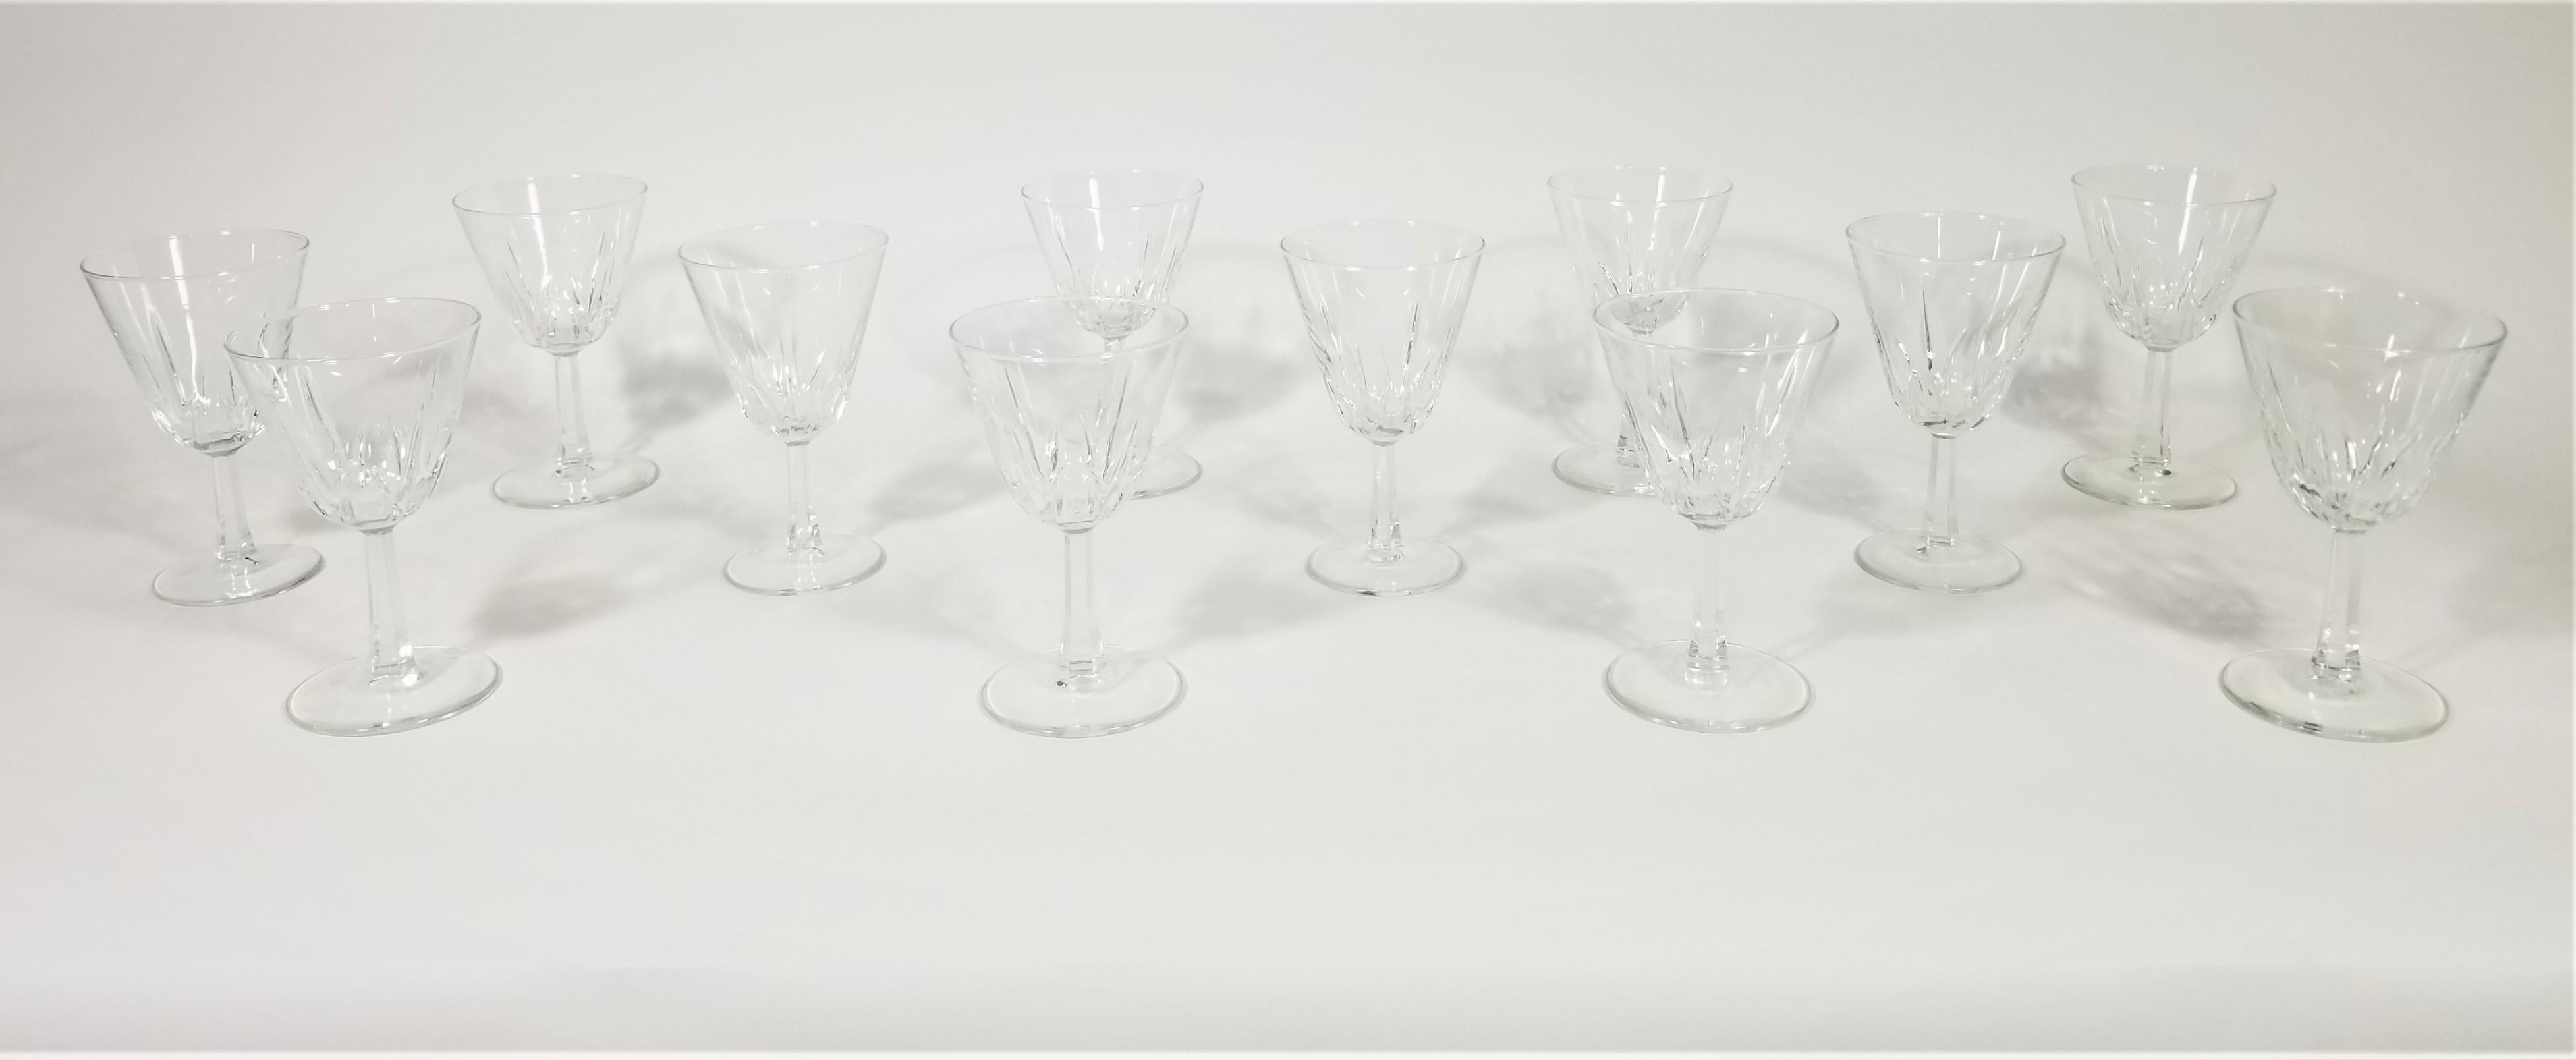 French Crystal Stemware Renaissance Verrerie D'arques France Midcentury In Excellent Condition For Sale In New York, NY